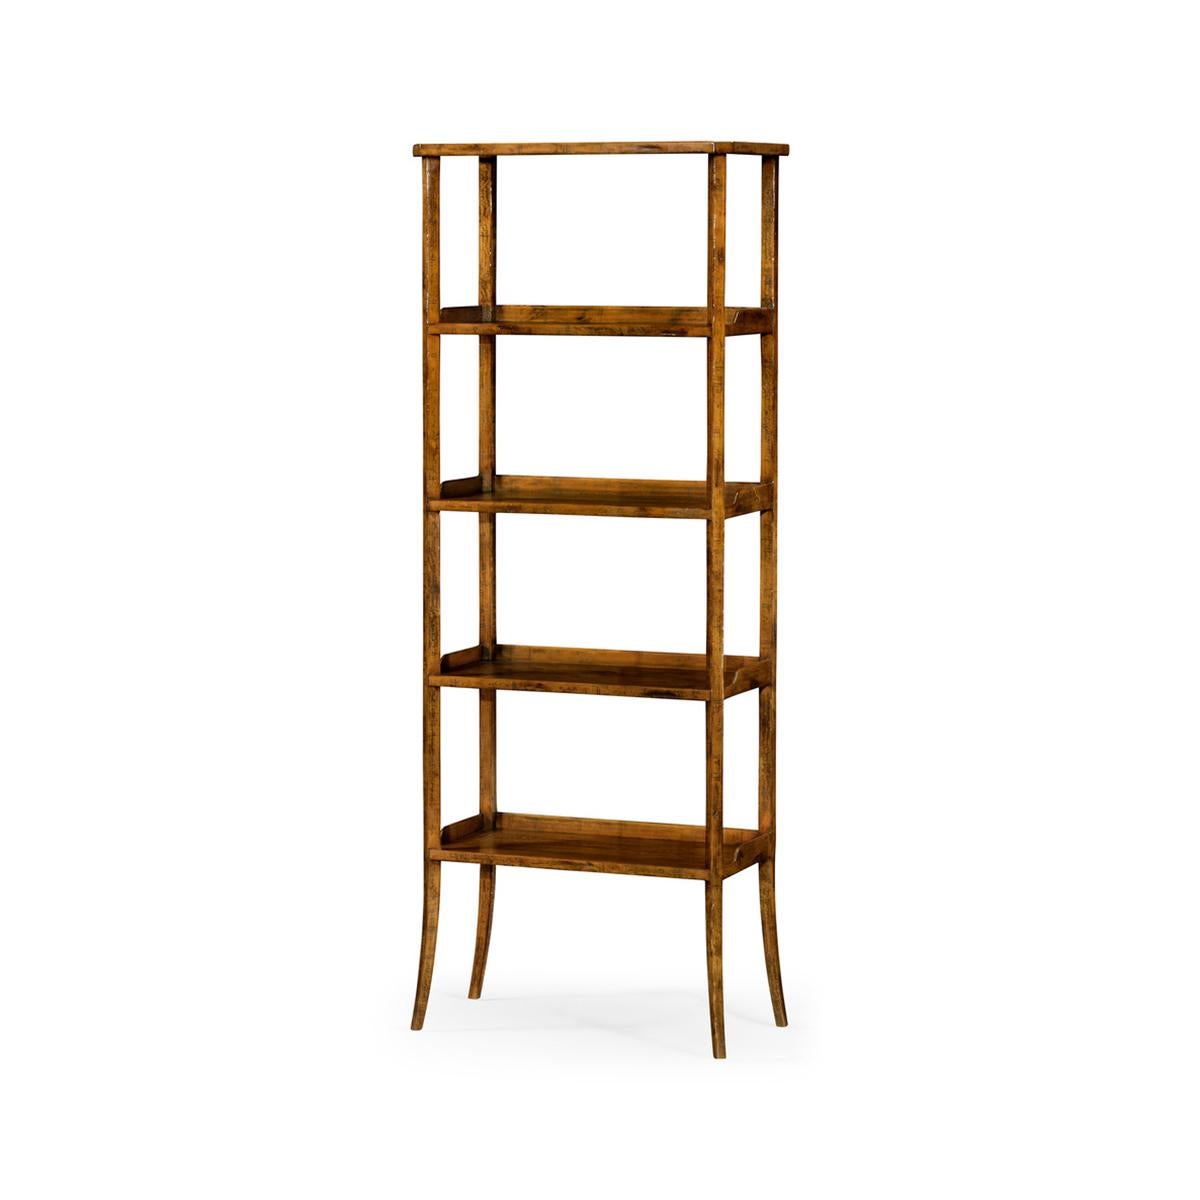 Rustic Country Walnut Etagere, a solid country-style four-tier etagere with wooden galleries, in an antiqued rustic finish.

Dimensions: 30.5